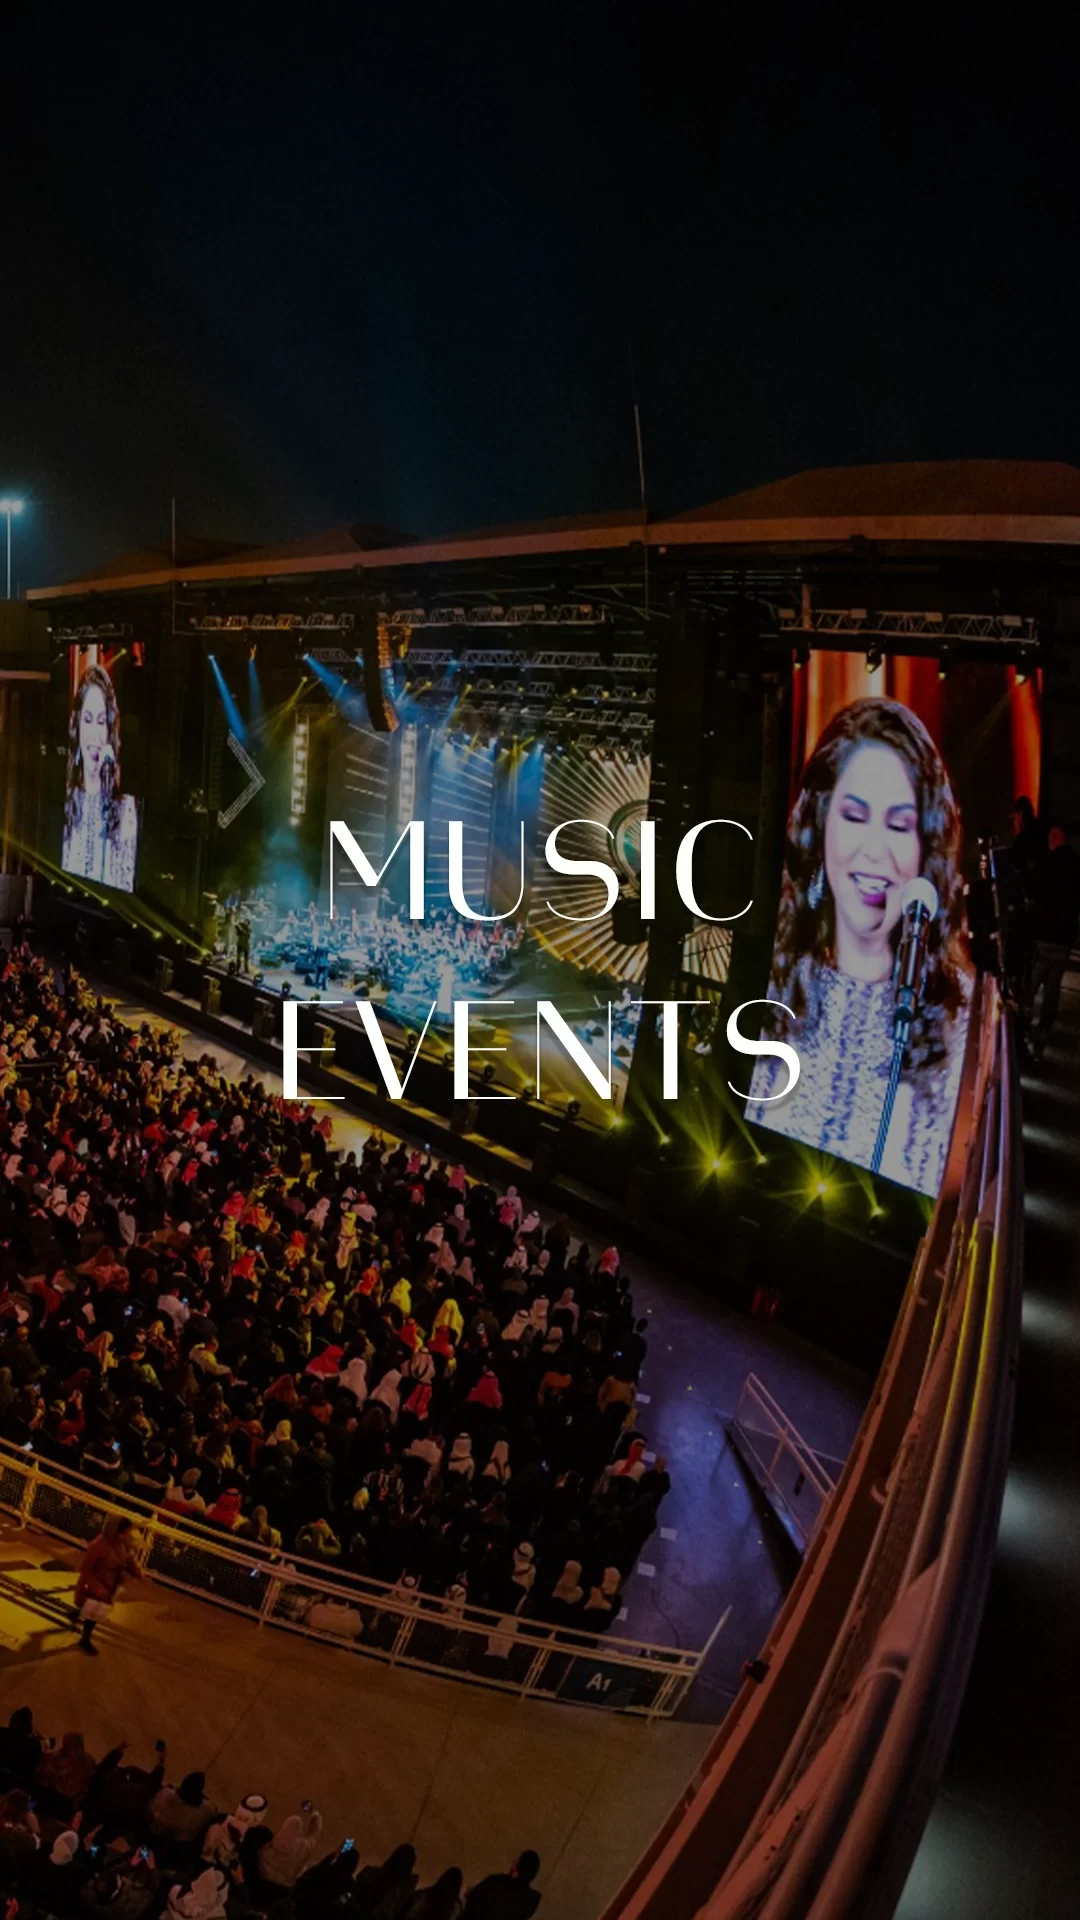 MUSIC EVENTS